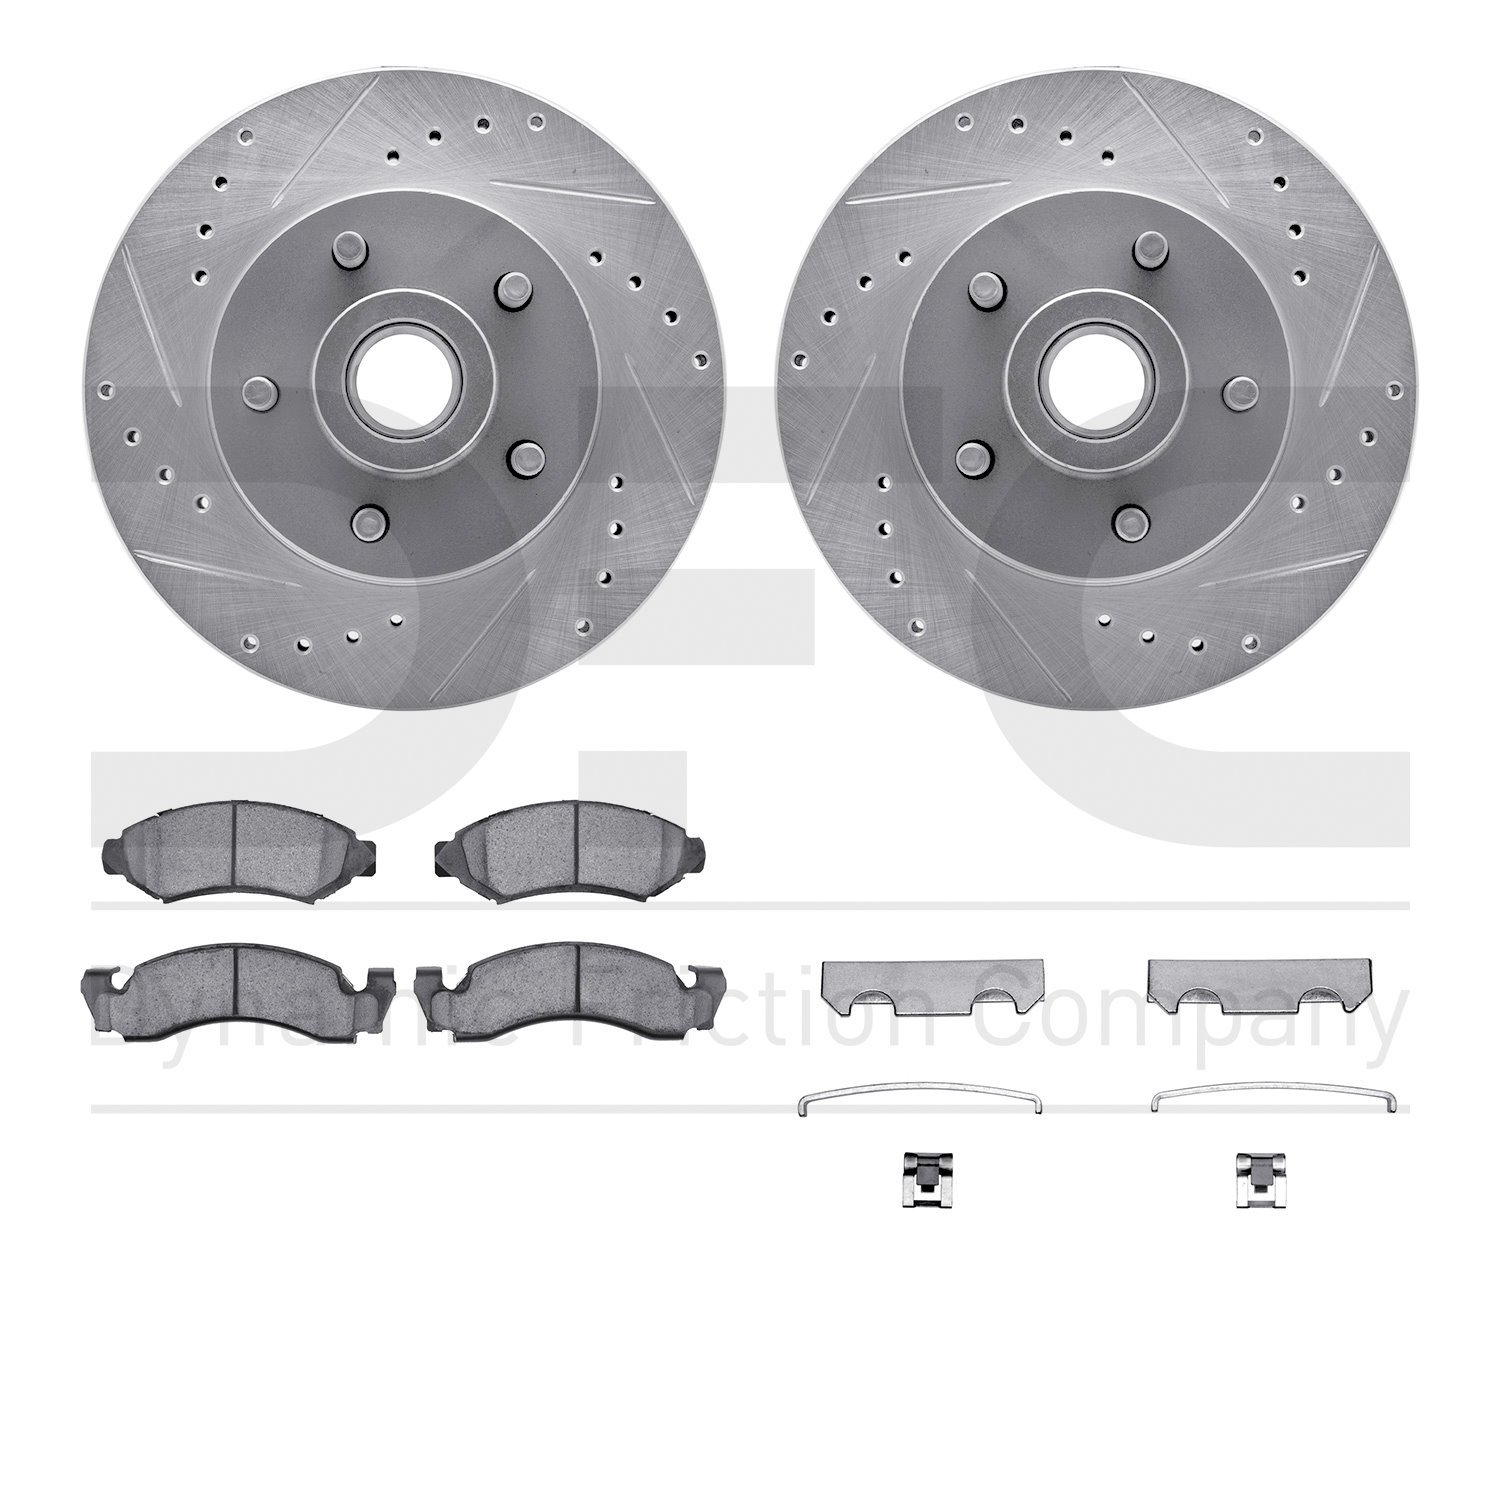 7412-54002 Drilled/Slotted Brake Rotors with Ultimate-Duty Brake Pads Kit & Hardware [Silver], 1974-1979 Ford/Lincoln/Mercury/Ma